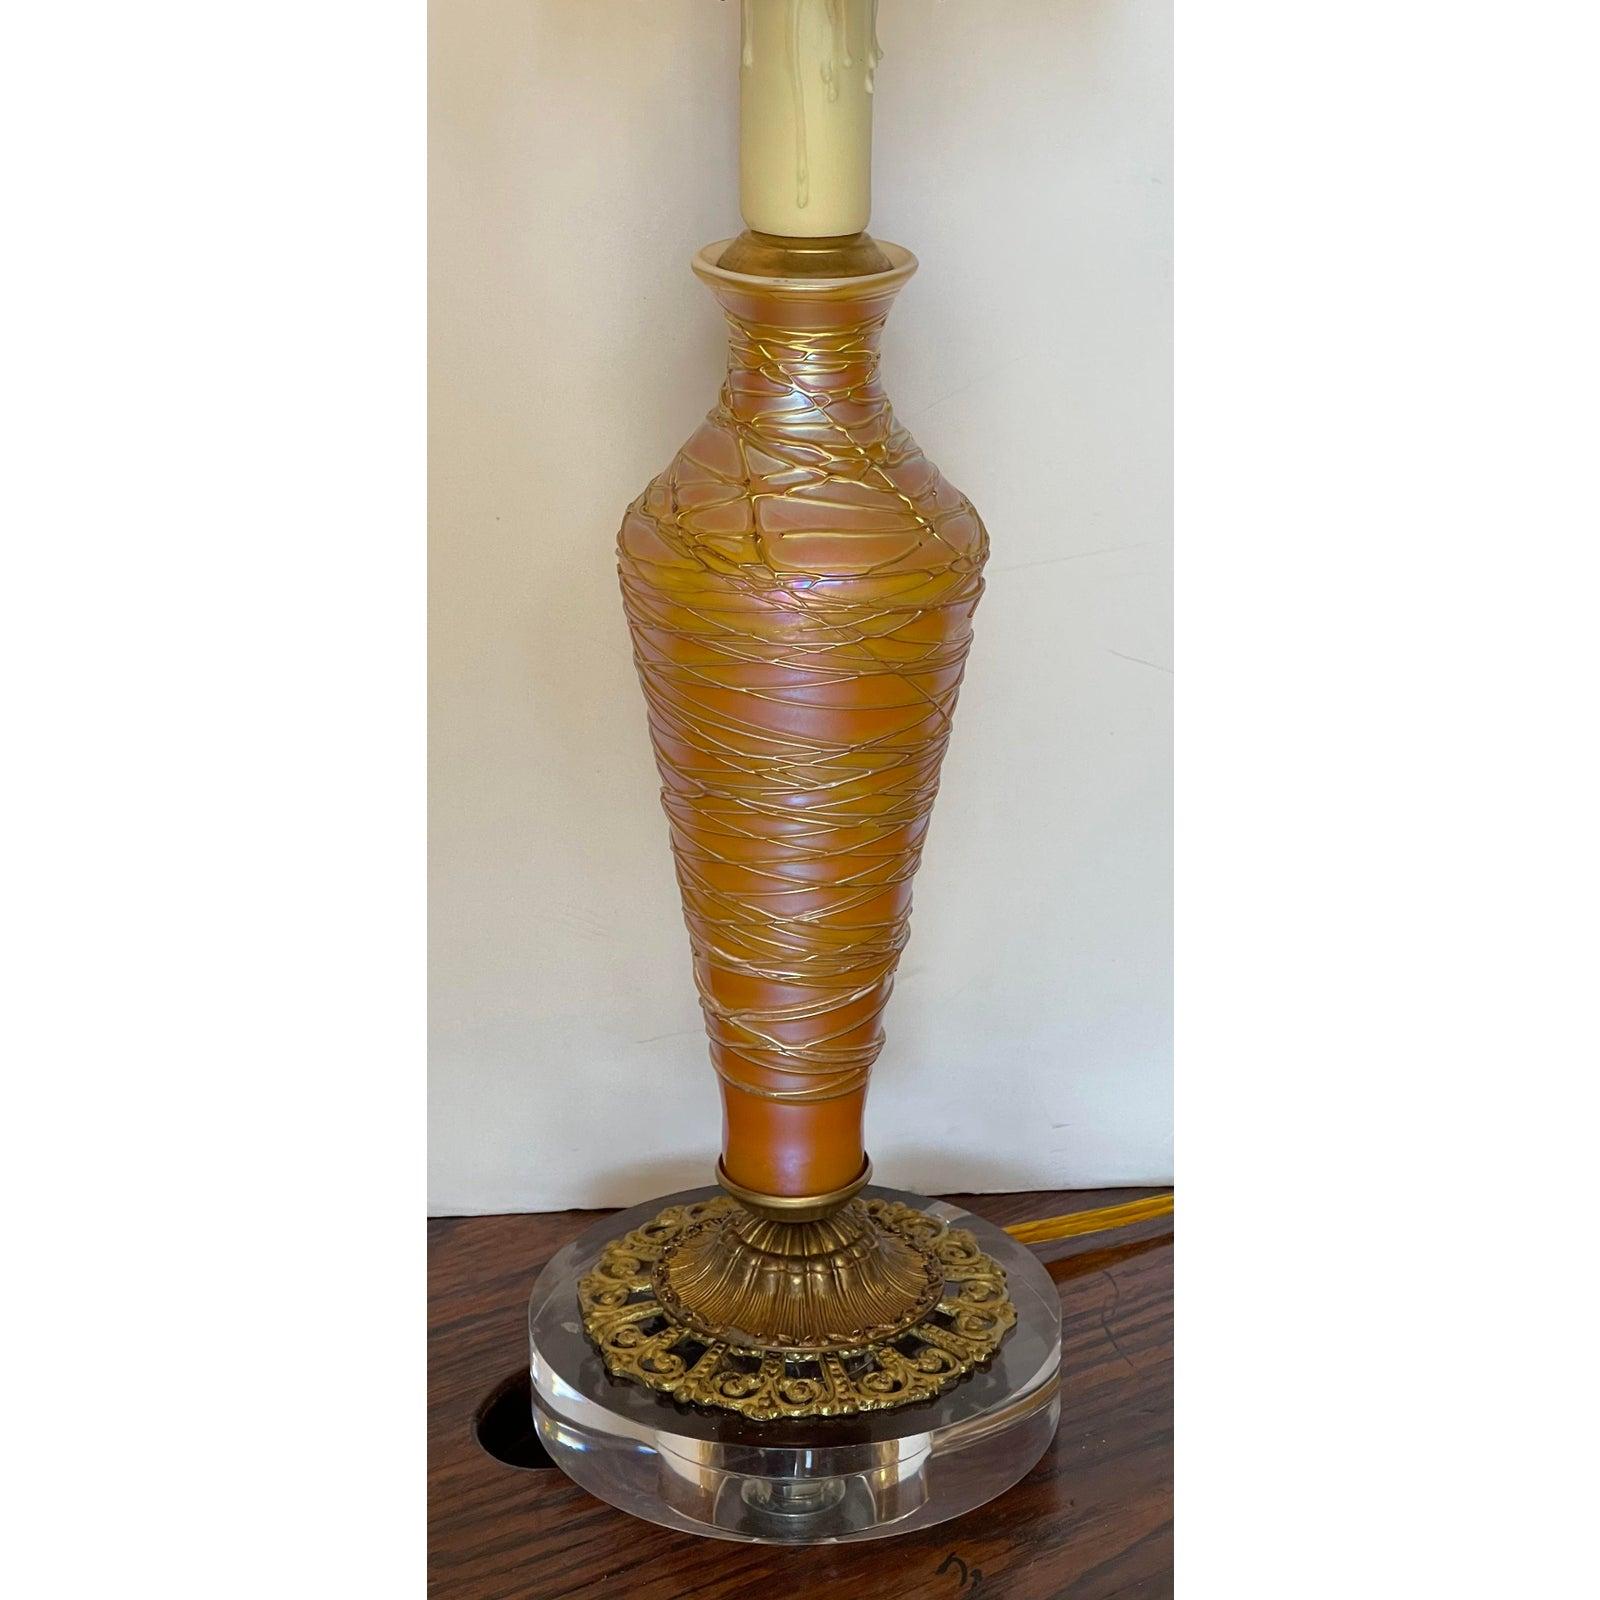 North American Antique Modernized Durand Threaded Glass Table Lamp, Early 20th Century For Sale